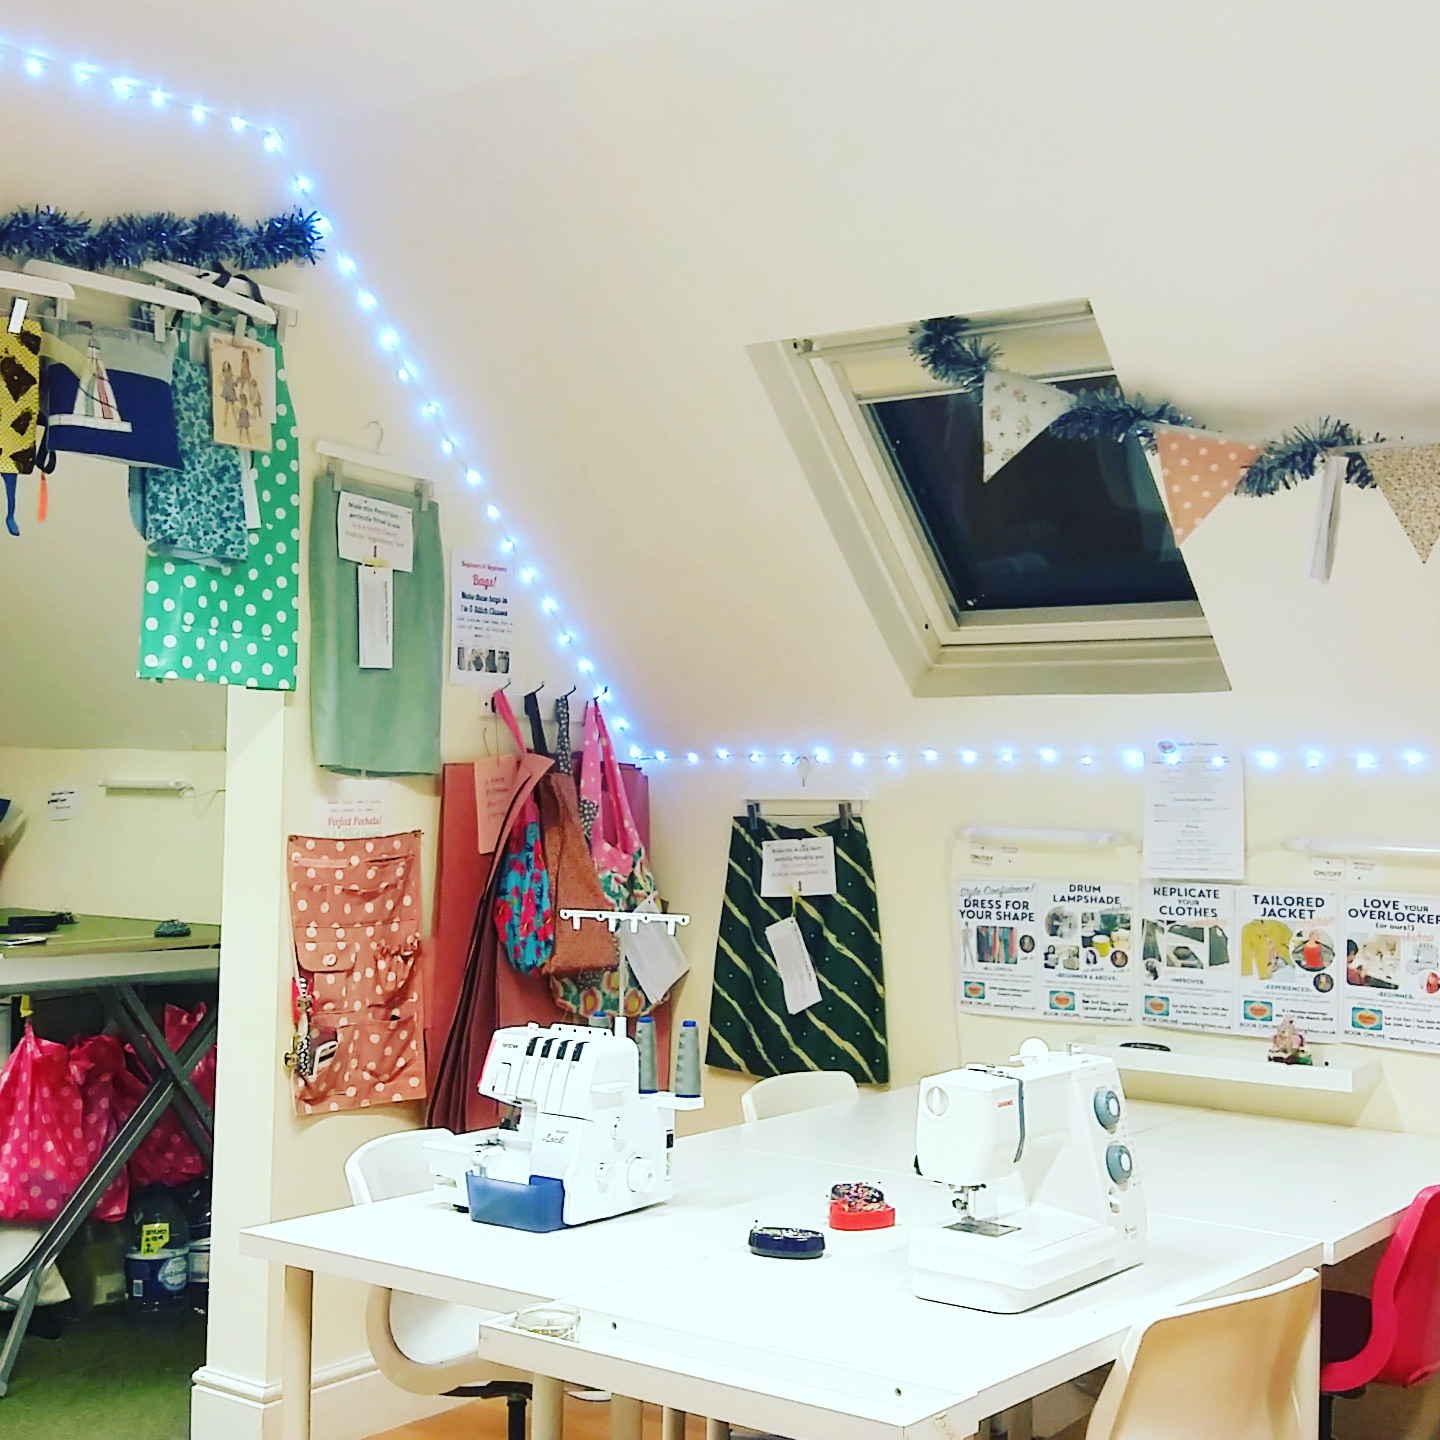 Hire our sewing classroom for your own workshops, meetings or craft/sewing projects